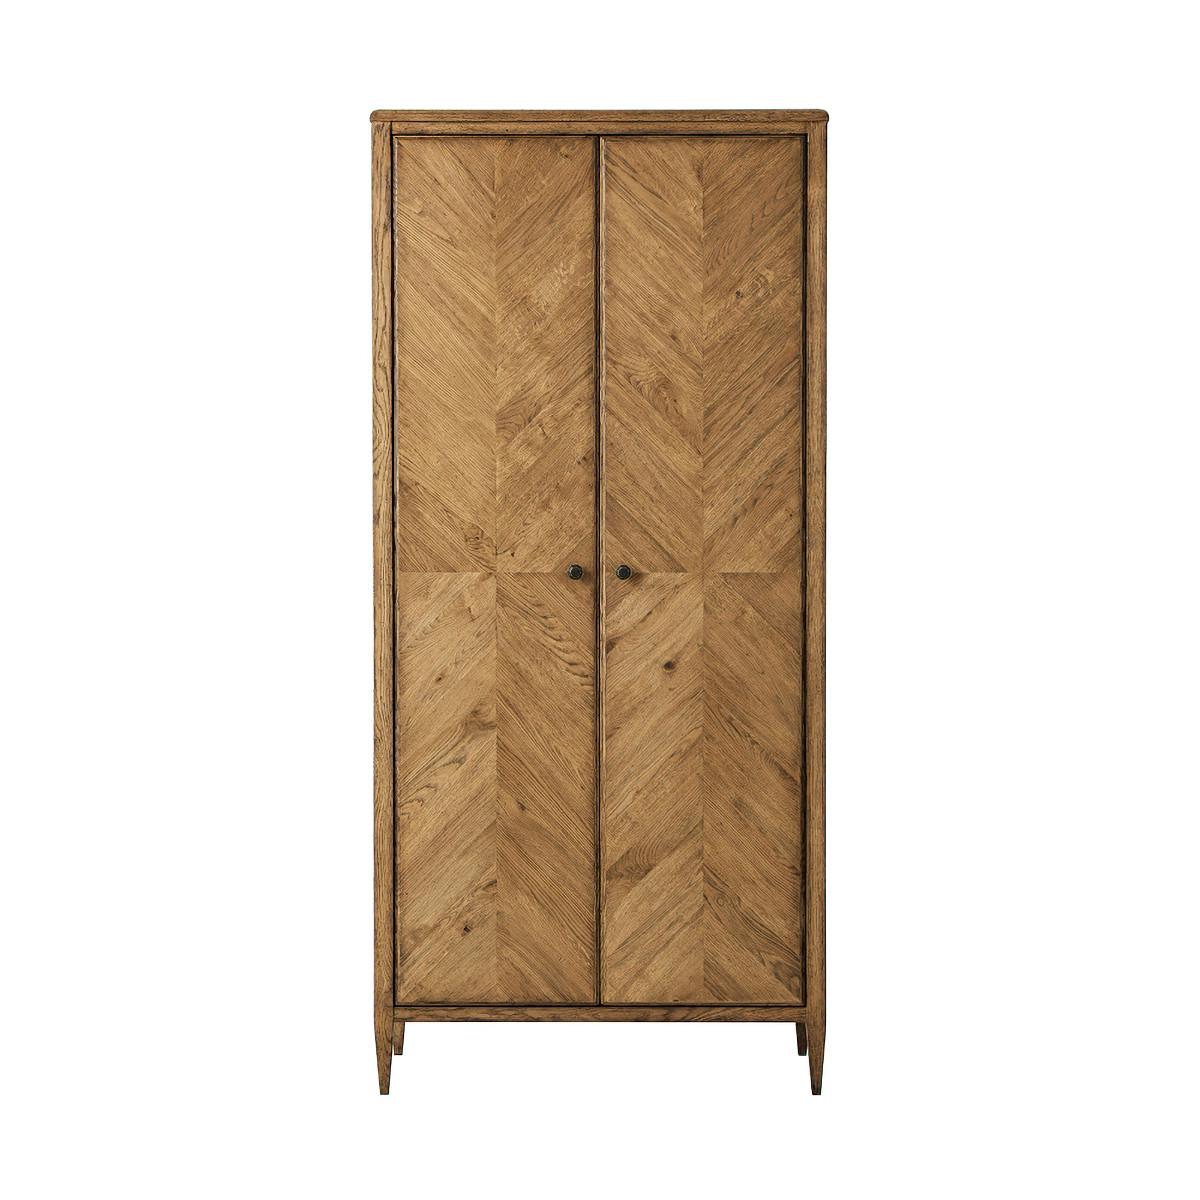 A tall light oak two door cabinet, with mirrored herringbone parquetry doors. It is adorned with elegant Verde Bronze knobs and rests upon tapered legs for added support. It is shown in our Dawn finish. 
Shown in Dawn Finish
Dimensions: 38